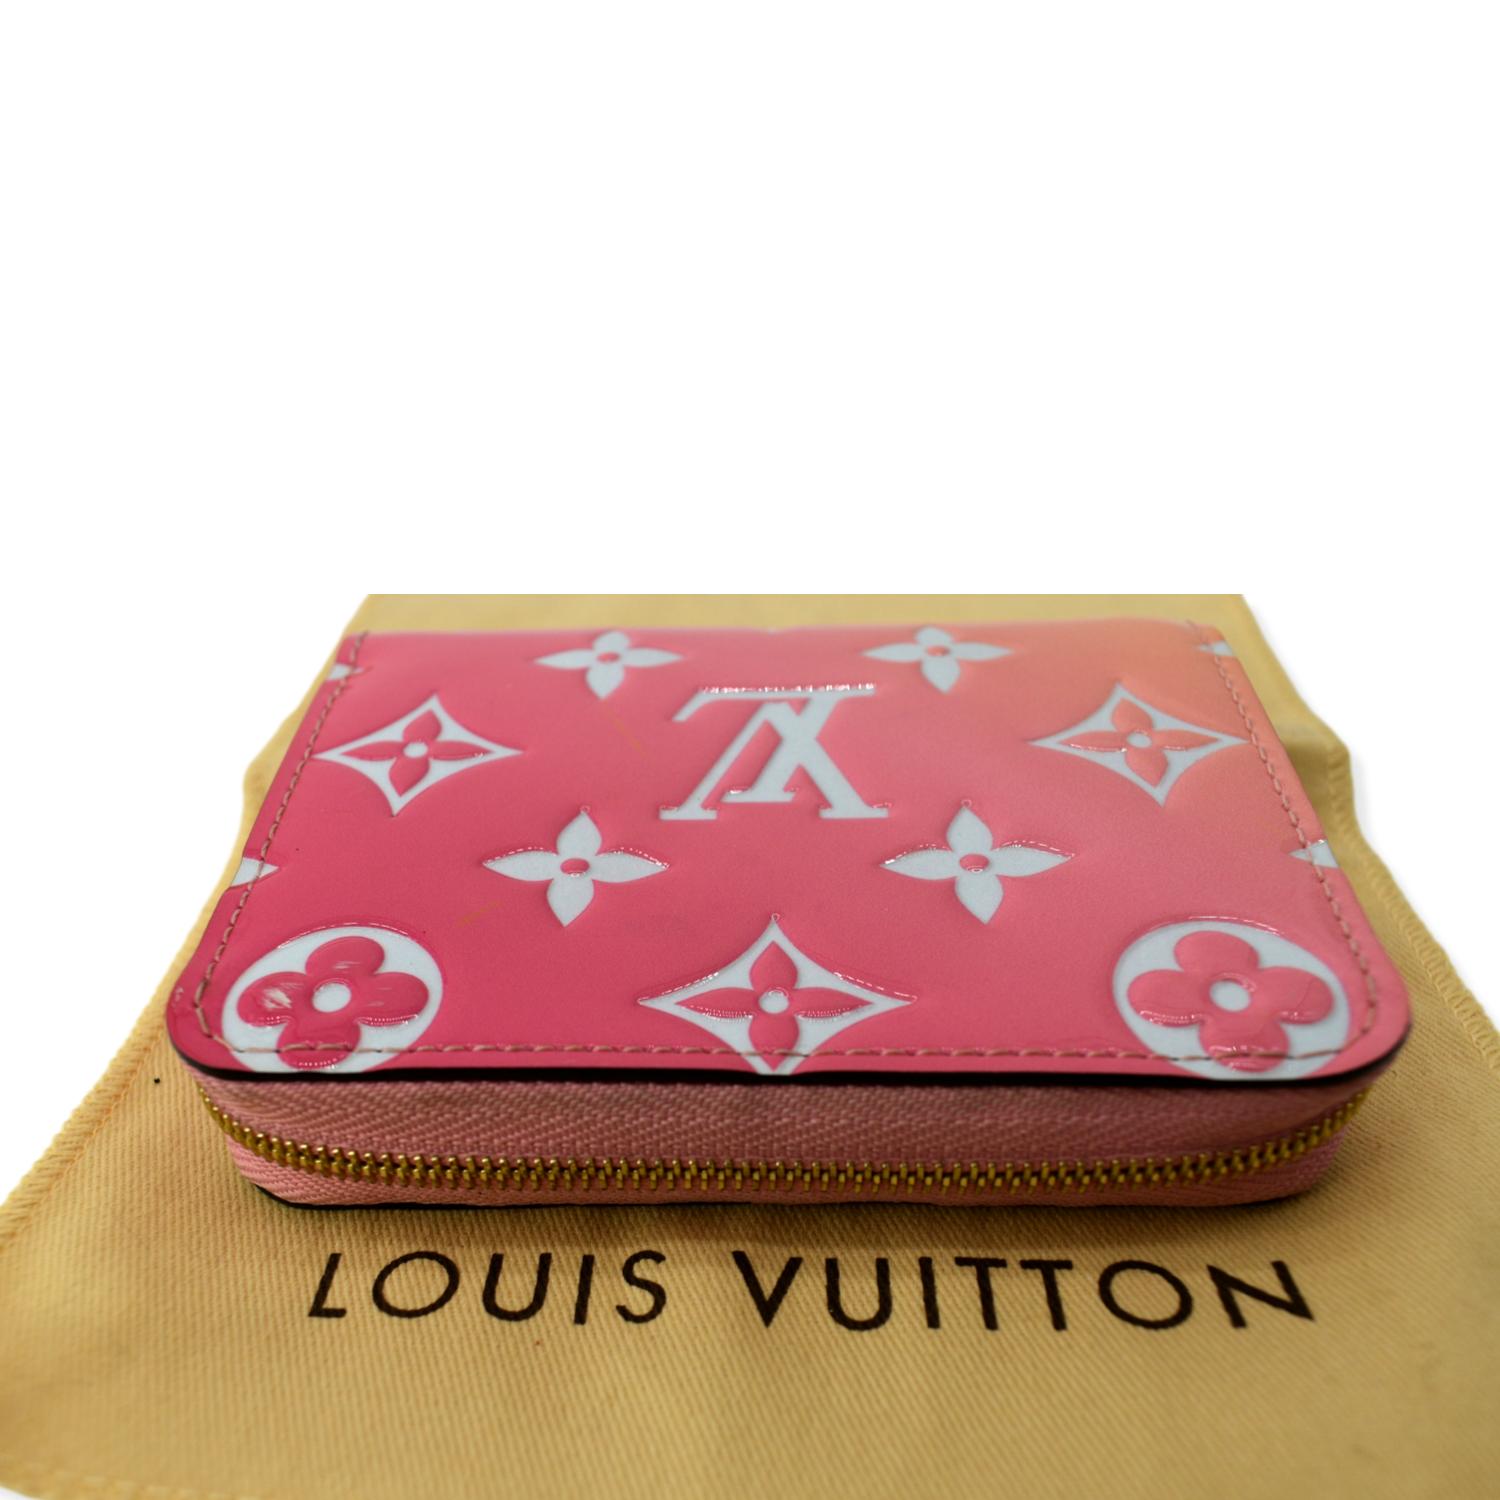 Authenticated Used Louis Vuitton Vernis Zippy Coin Purse Mini